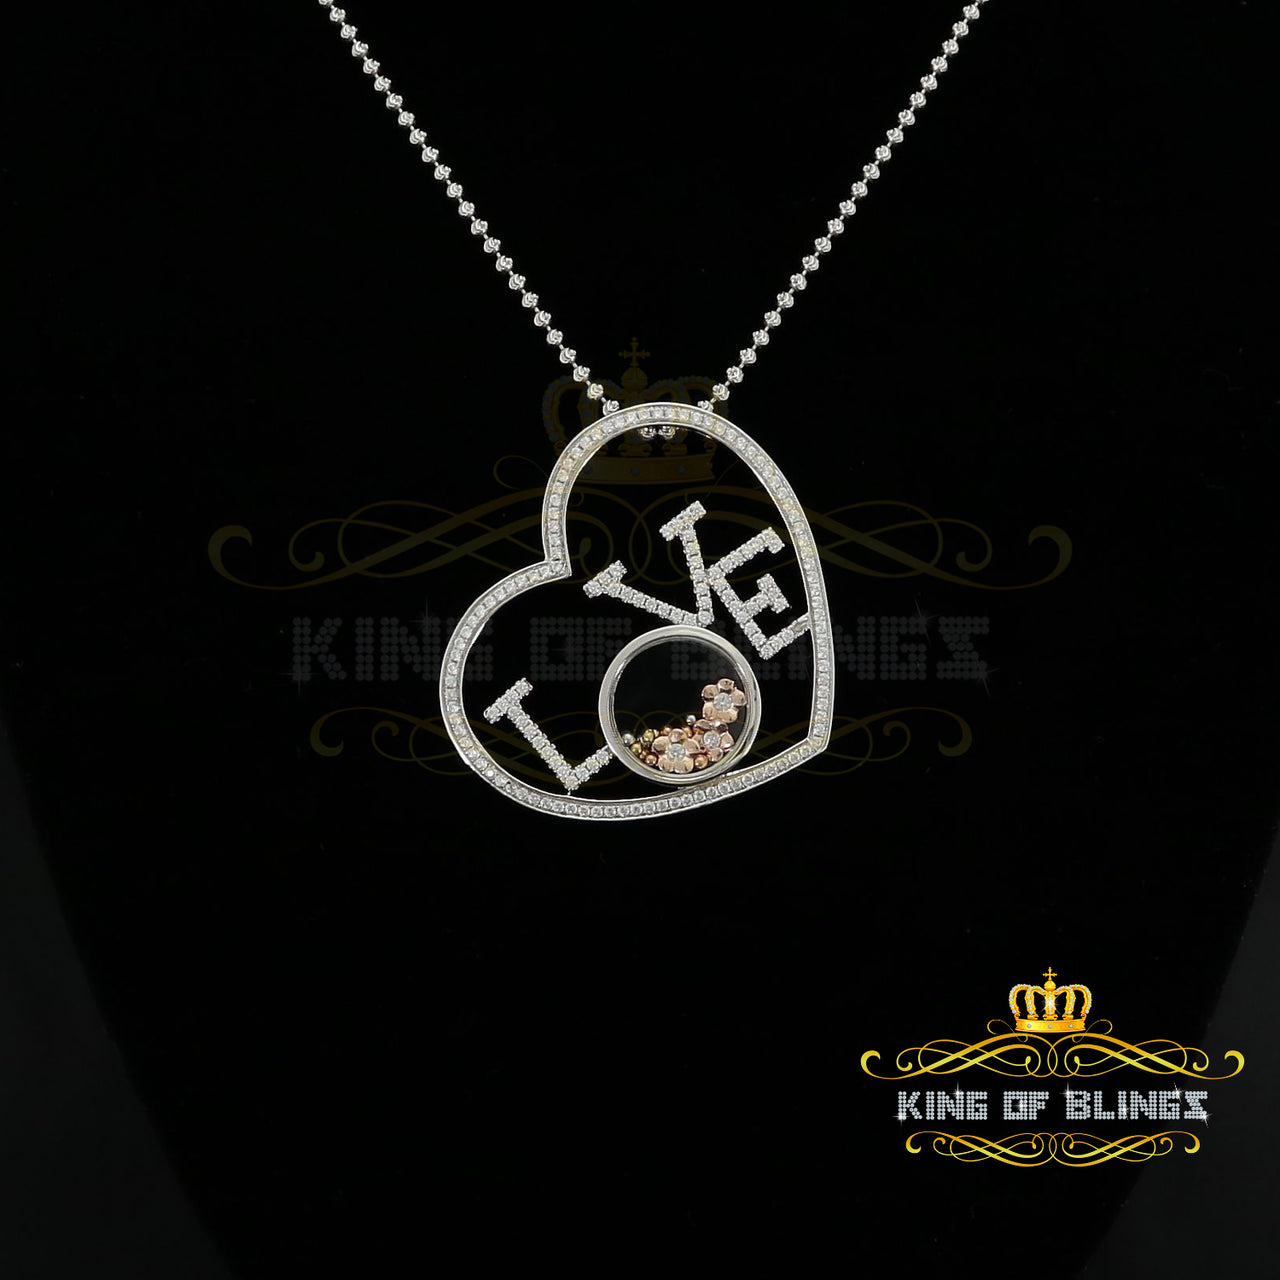 King Of Bling's Promising White 925 Sterling Silver 'LOVE IN HEART" Pendant with Cubic Zirconia